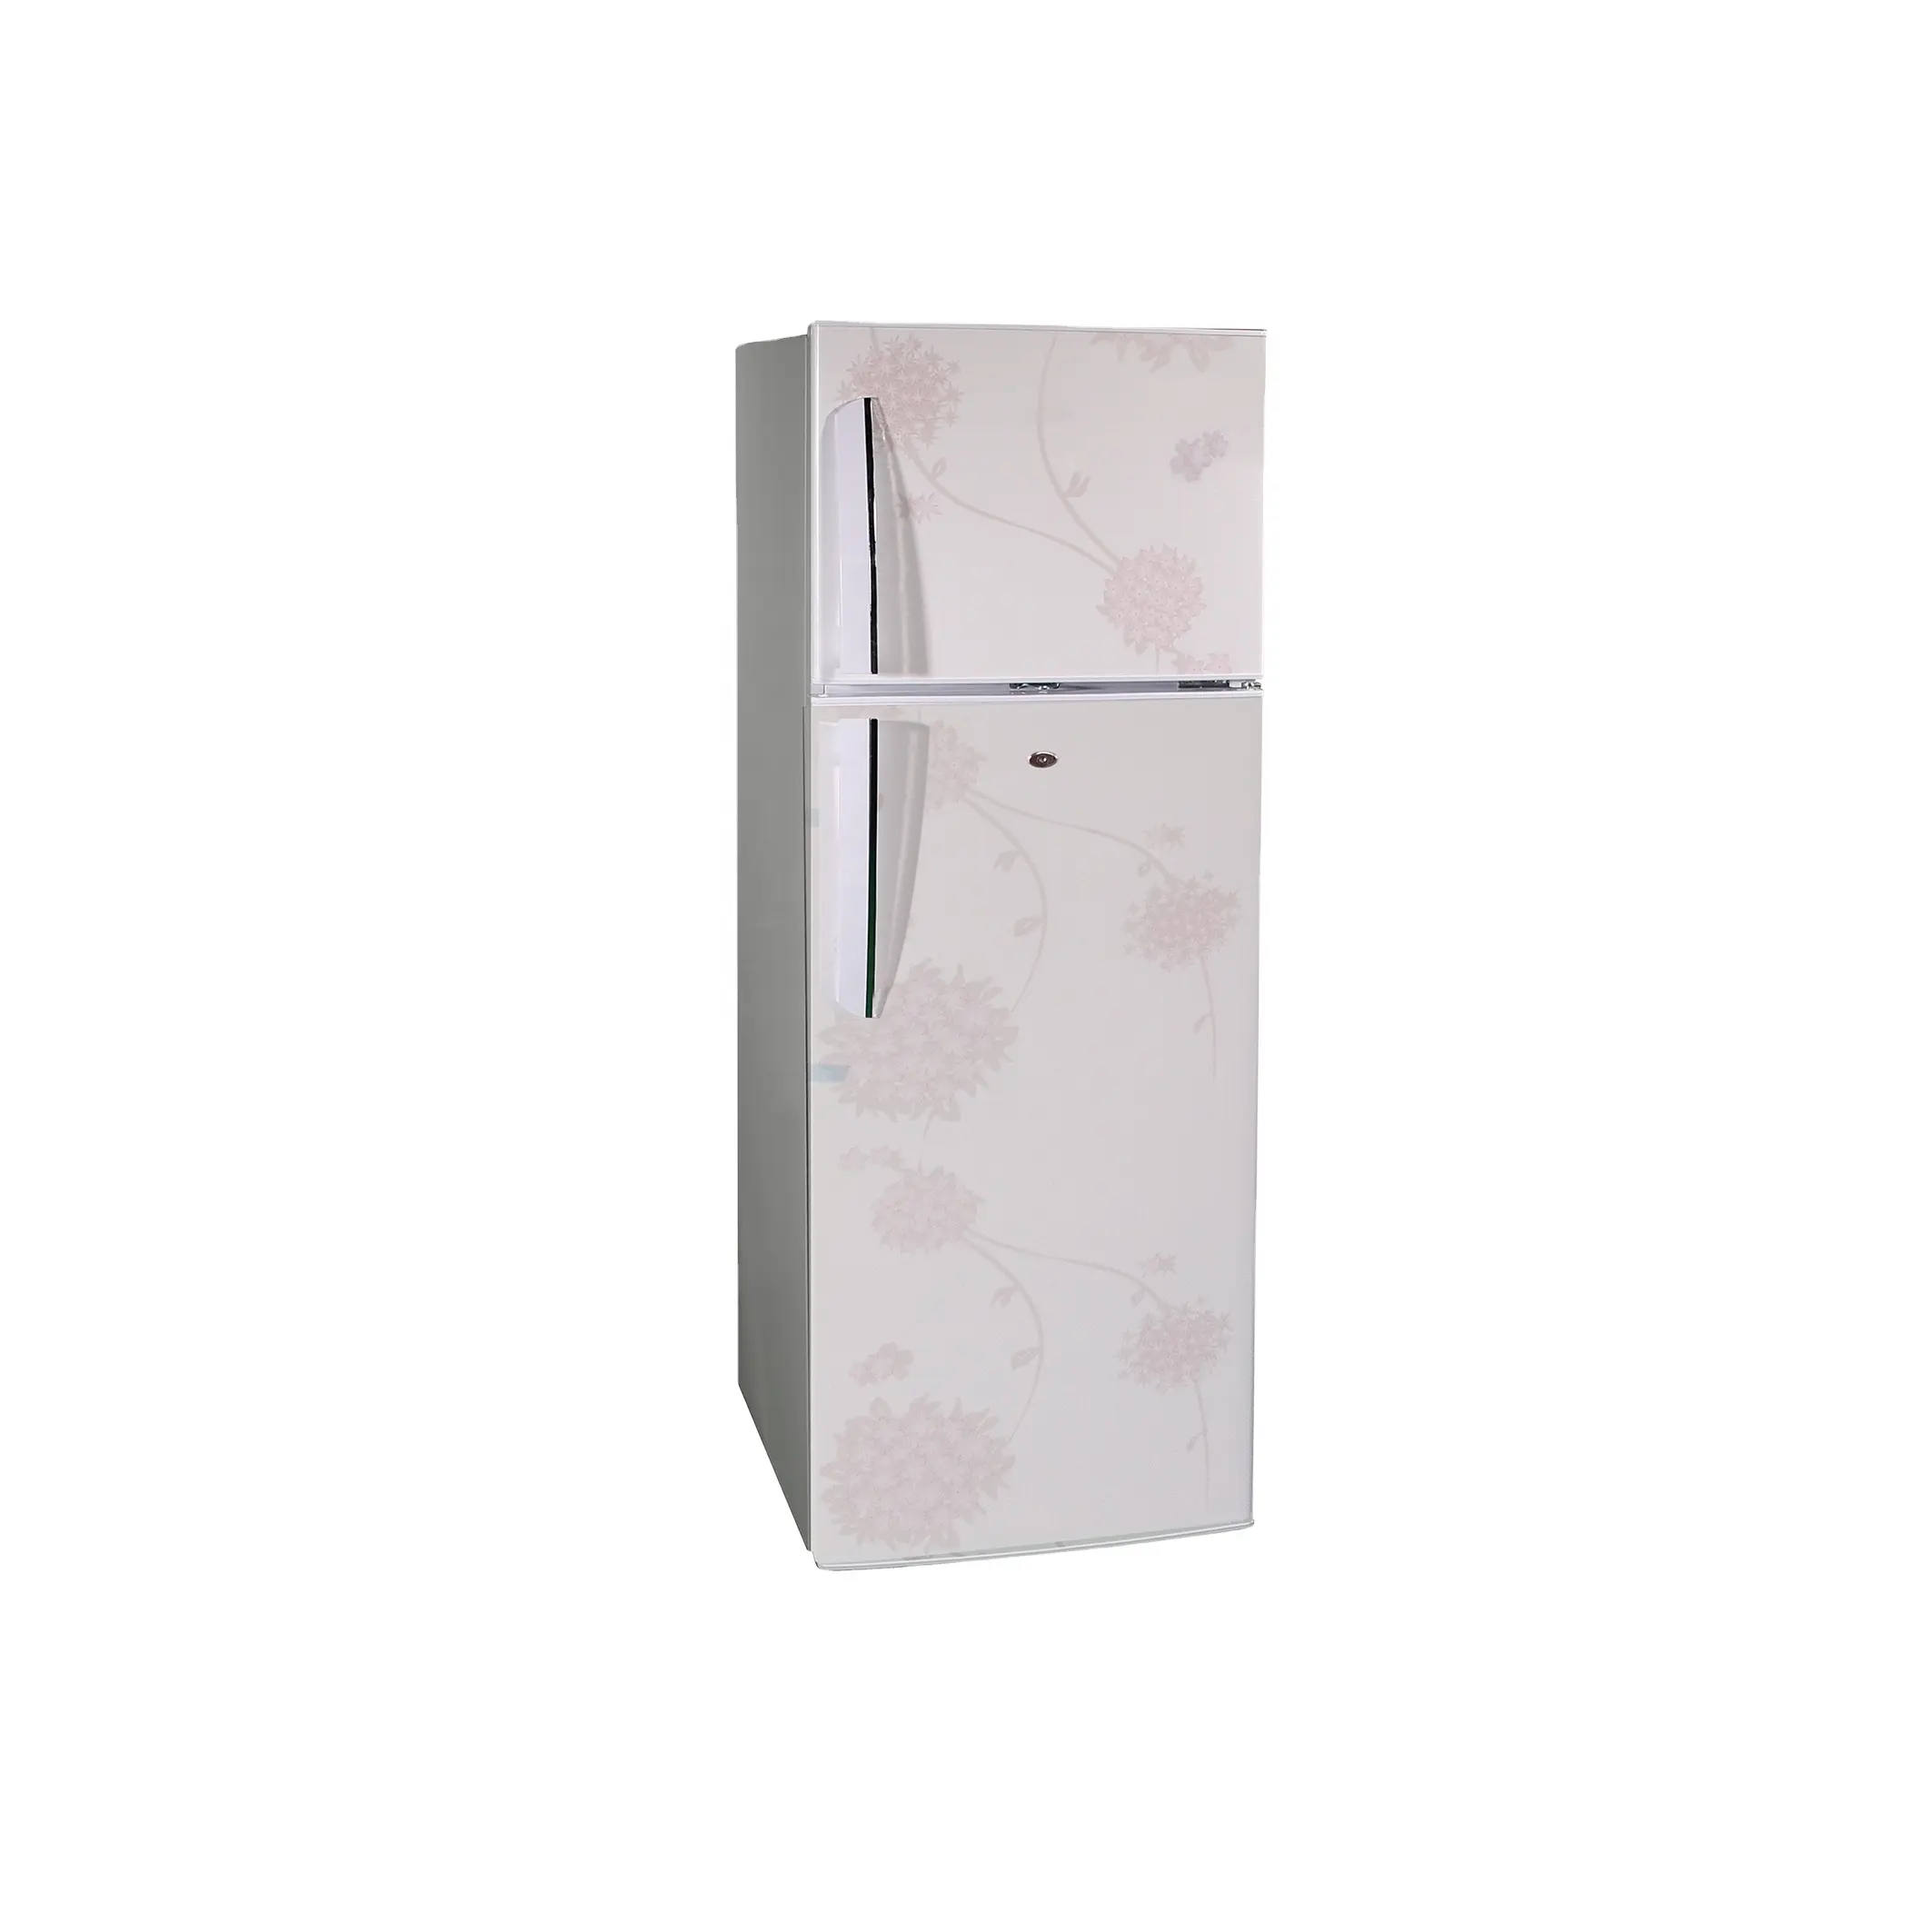 BCD-215A New Design Home Appliance double-Door Refrigerator